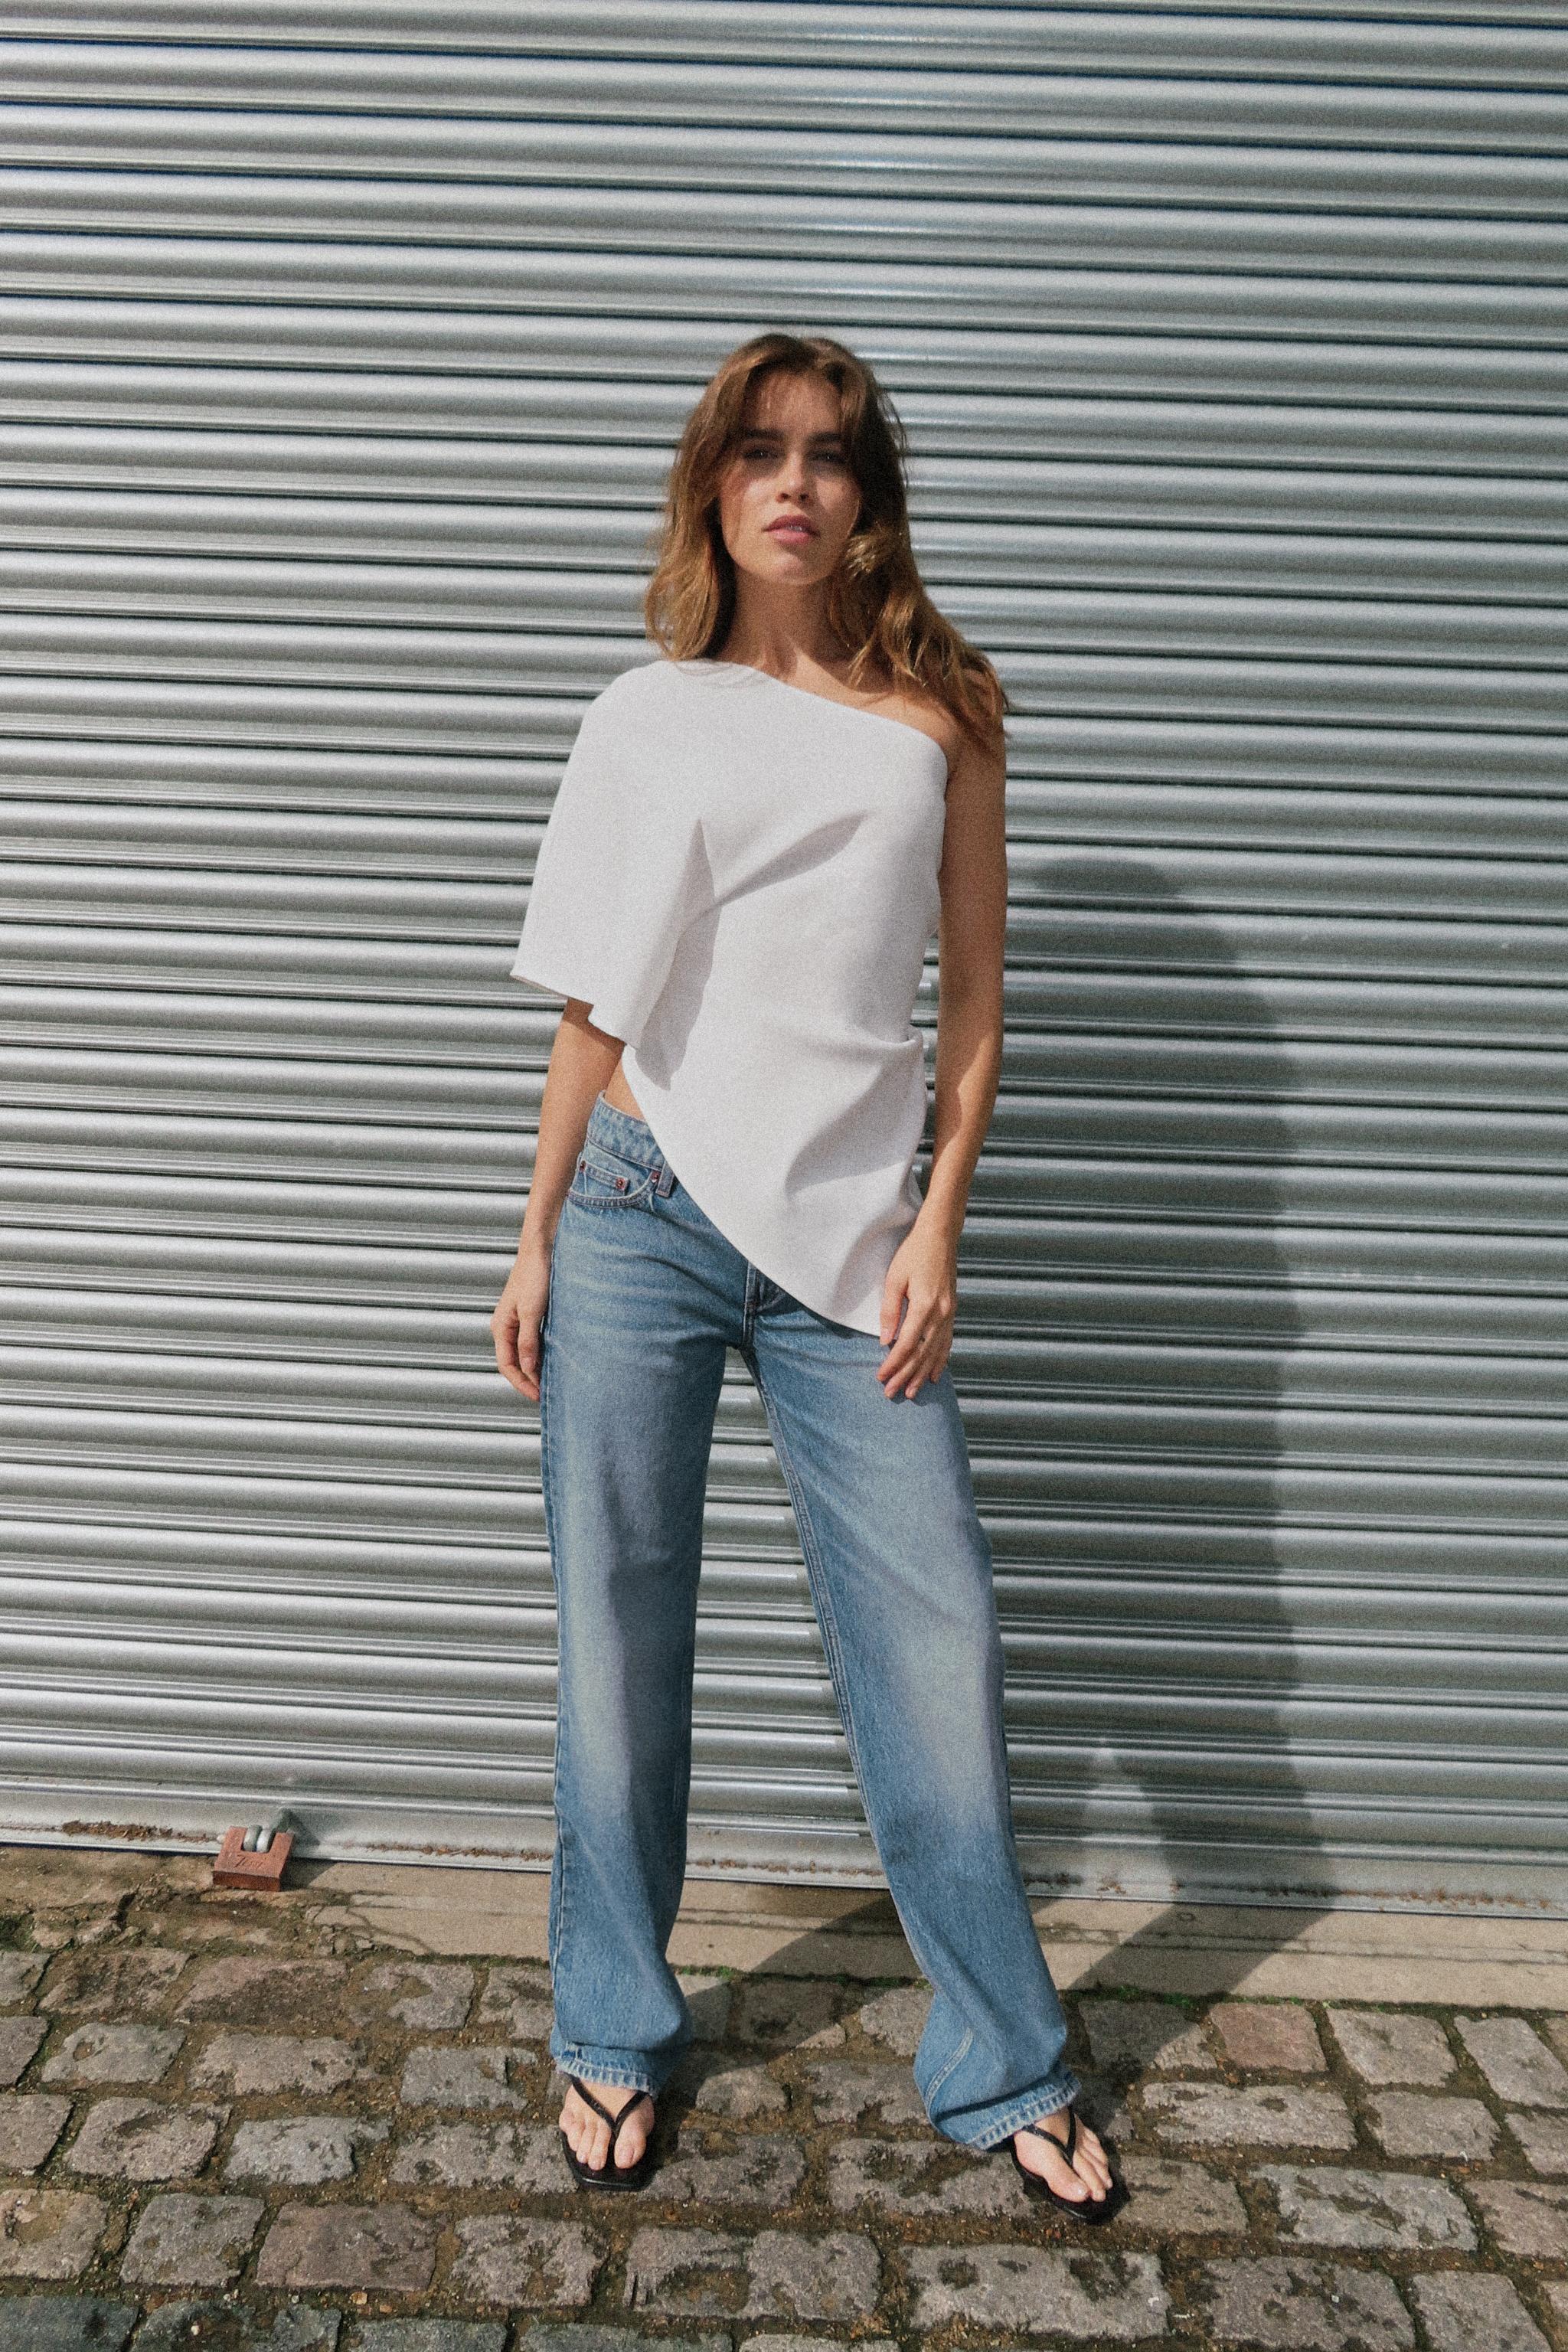 Women's White Tops, Explore our New Arrivals